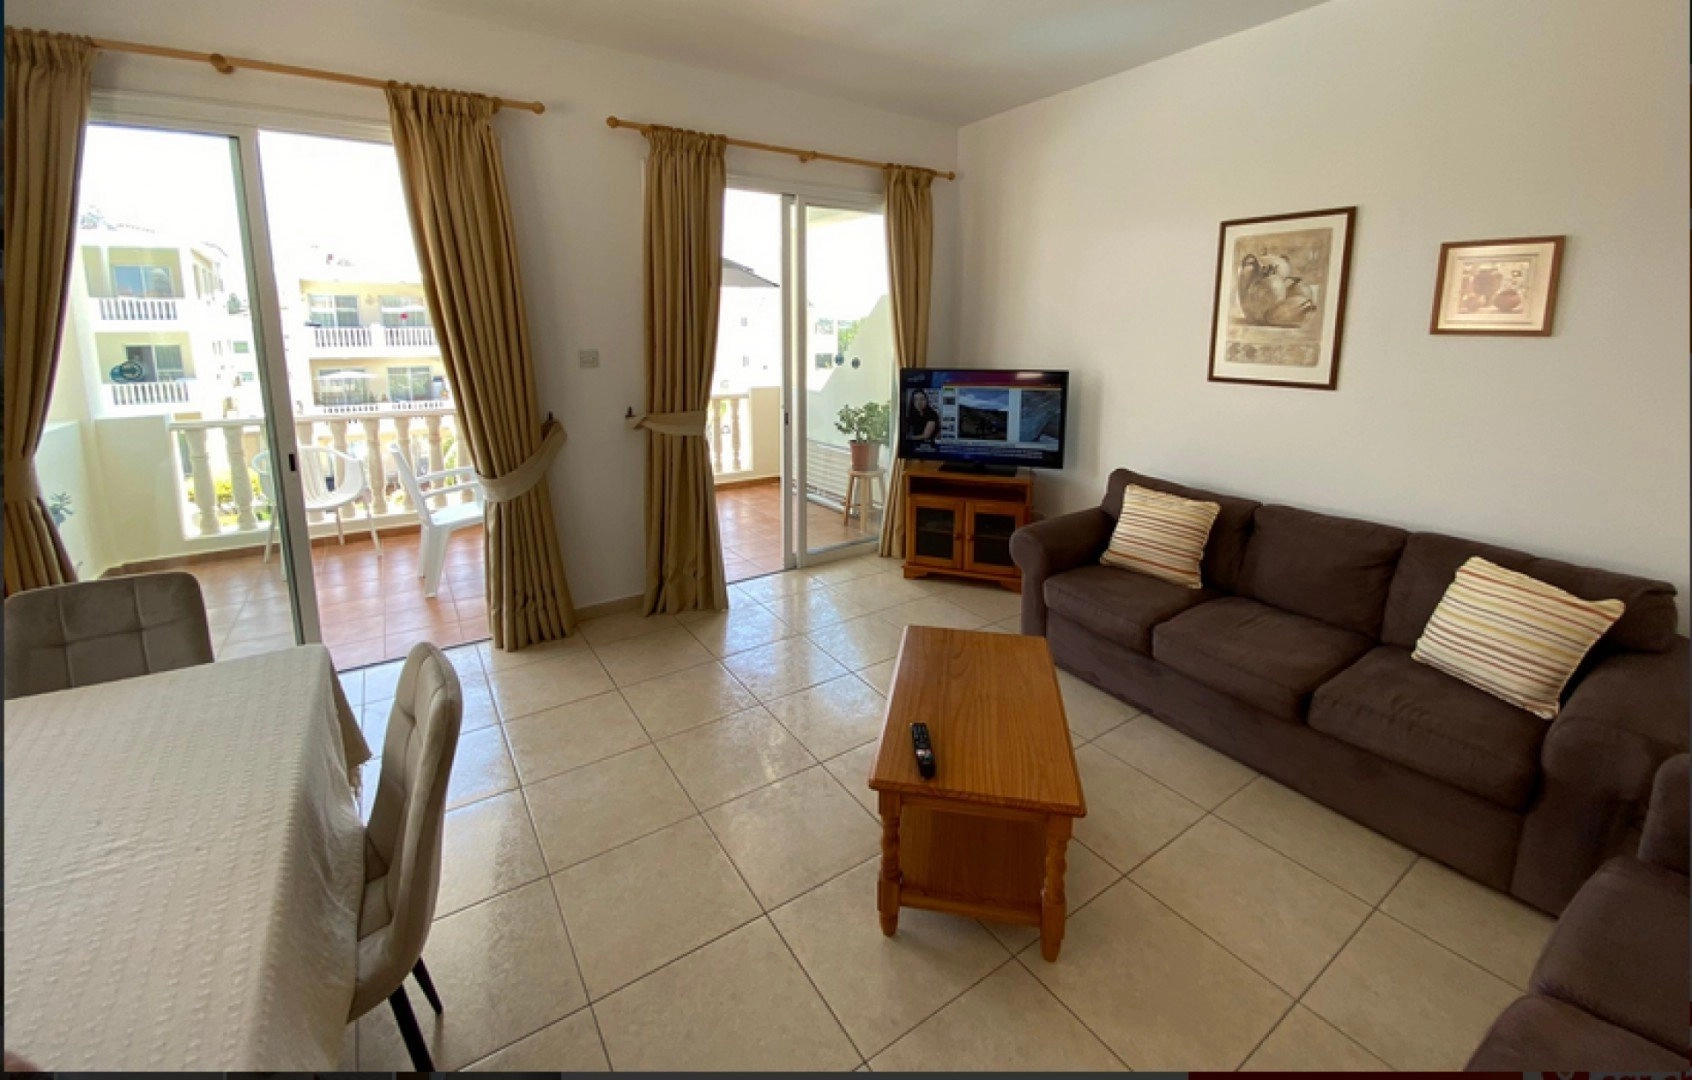 2 Bedroom Apartment for Rent in Paphos – Universal